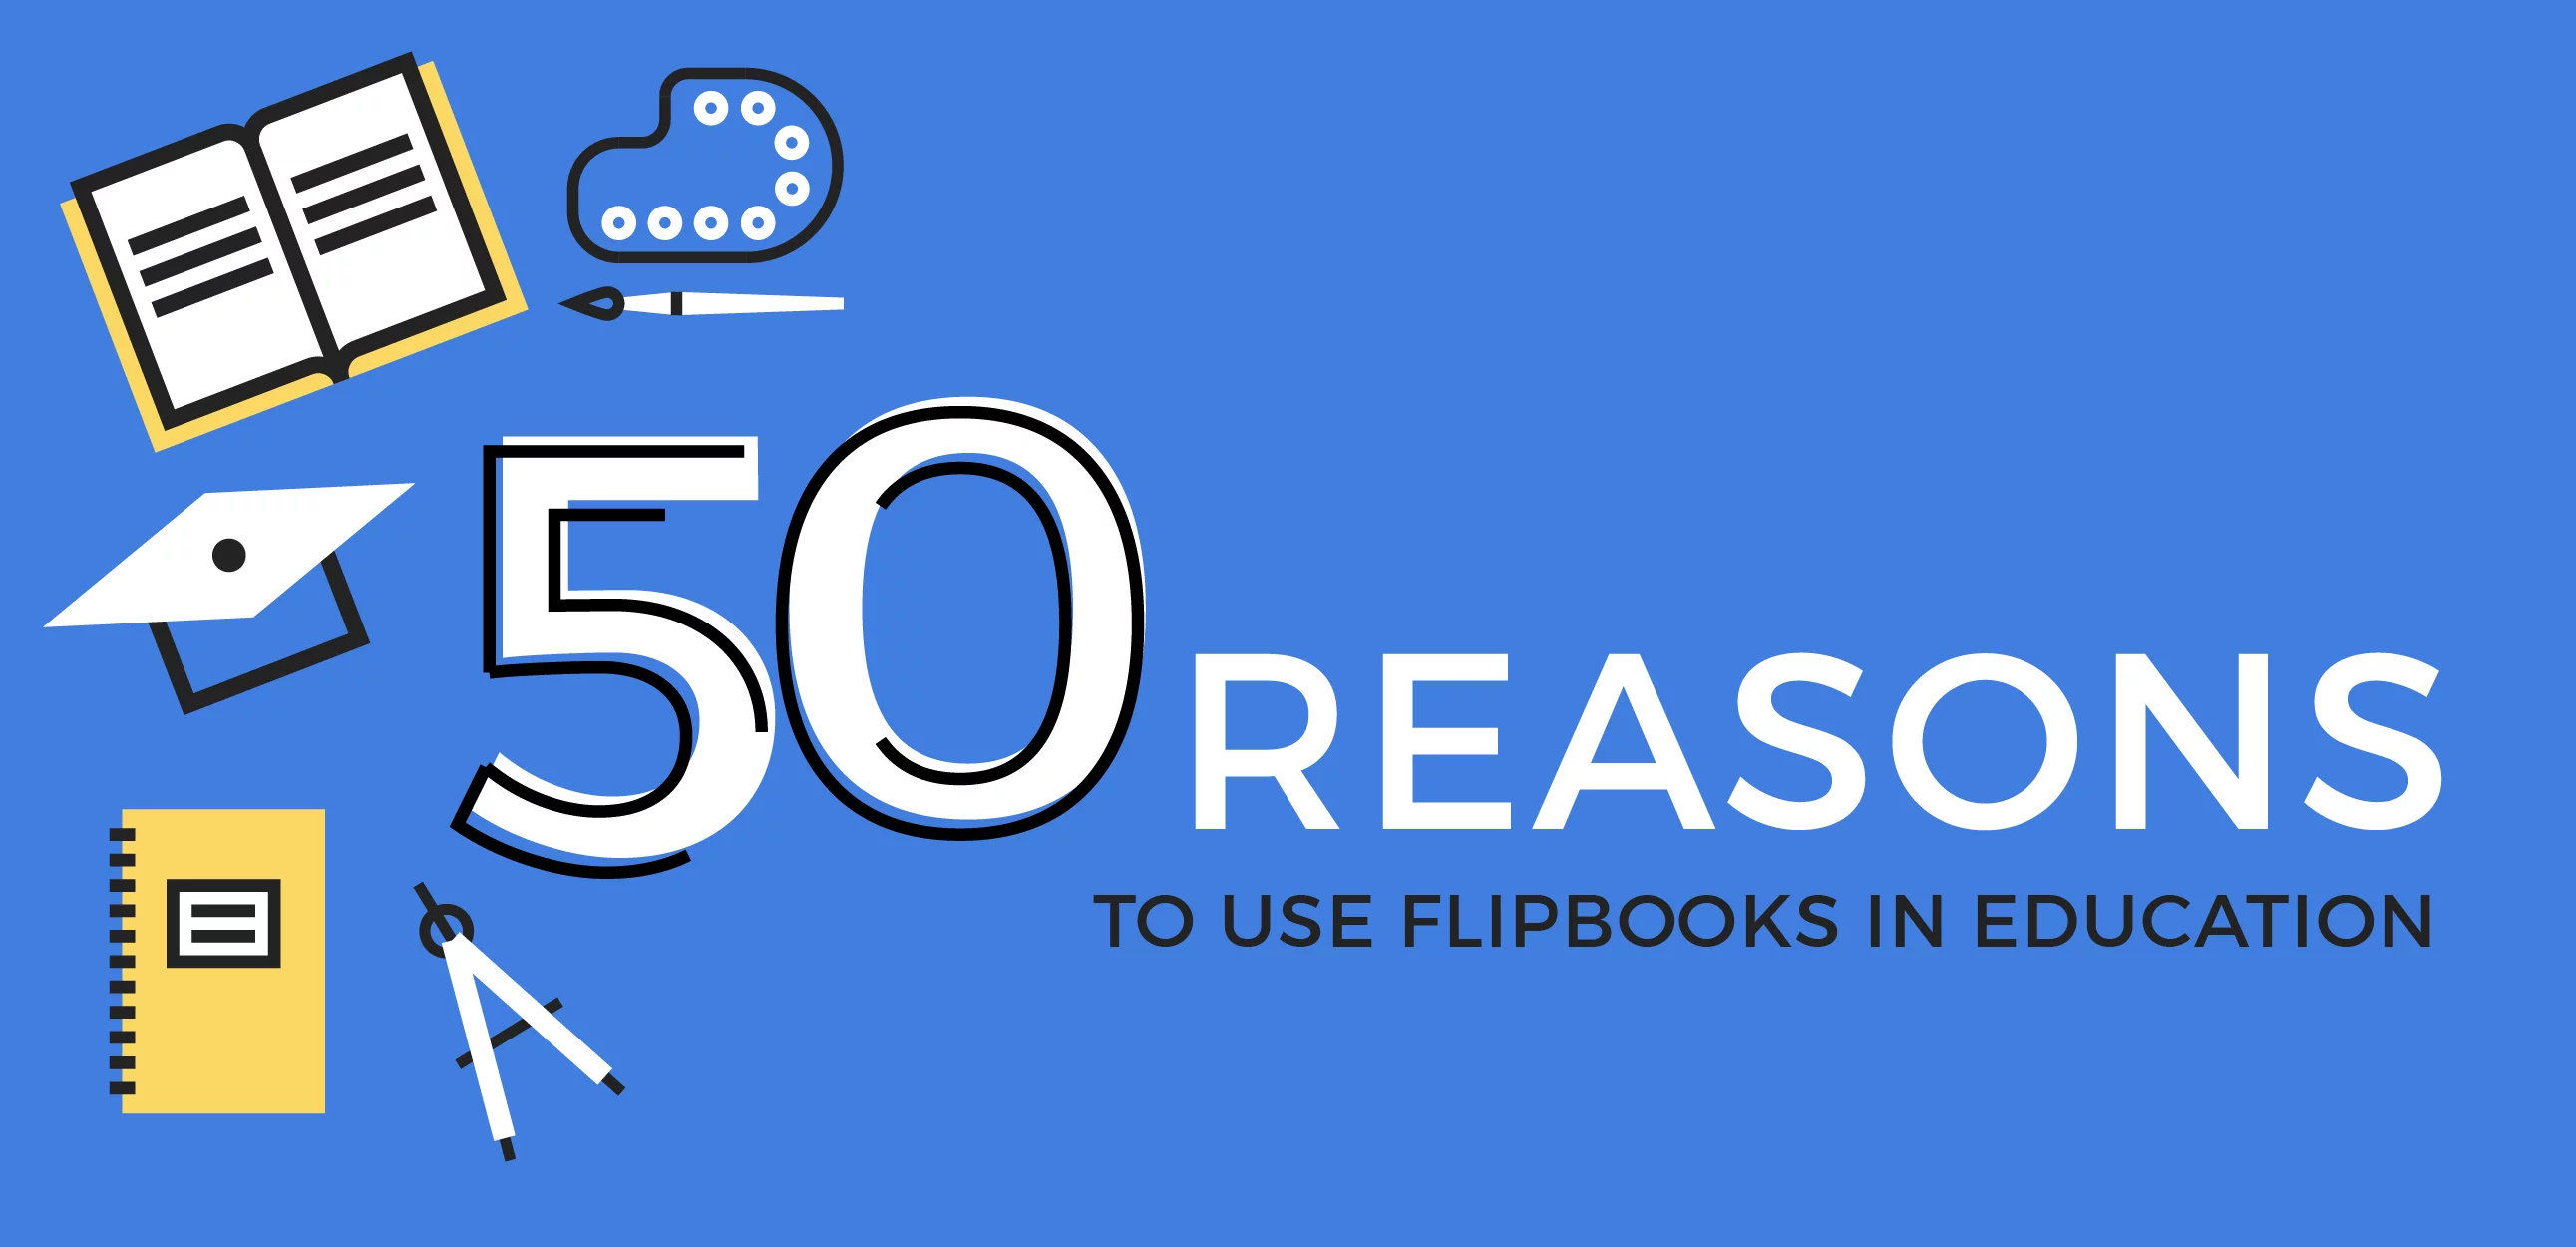 50 reasons to use flipbooks in education